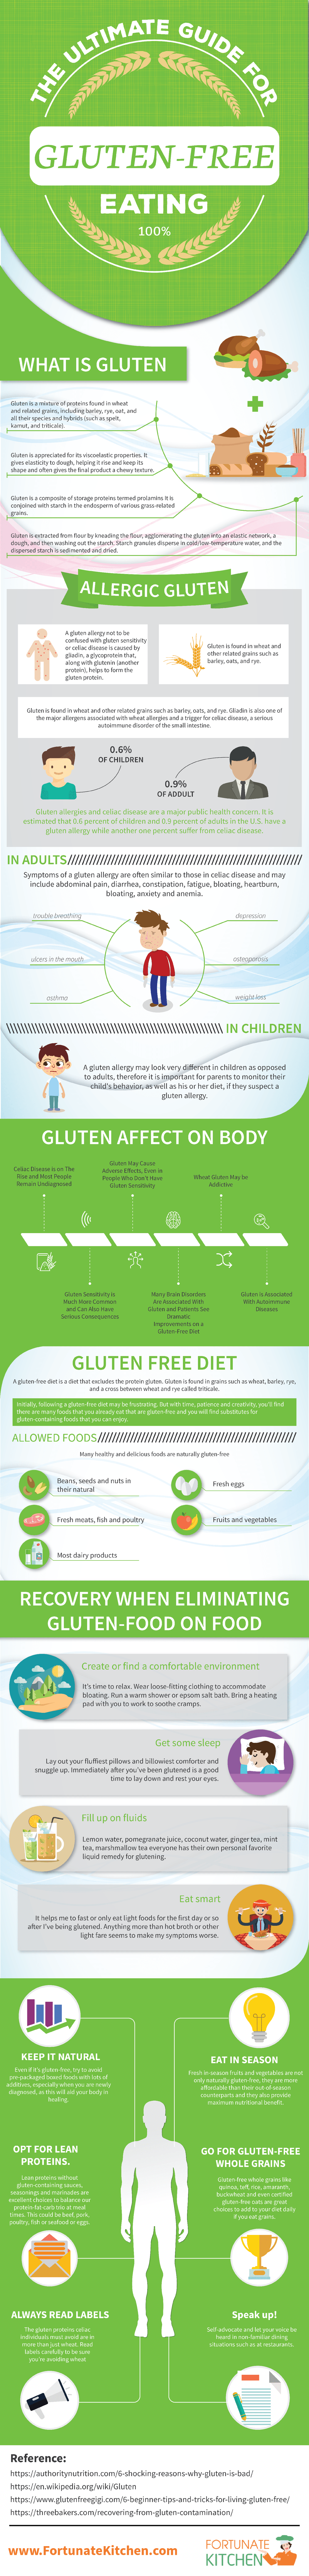 The Ultimate Guide for 100% Gluten-Free Eating